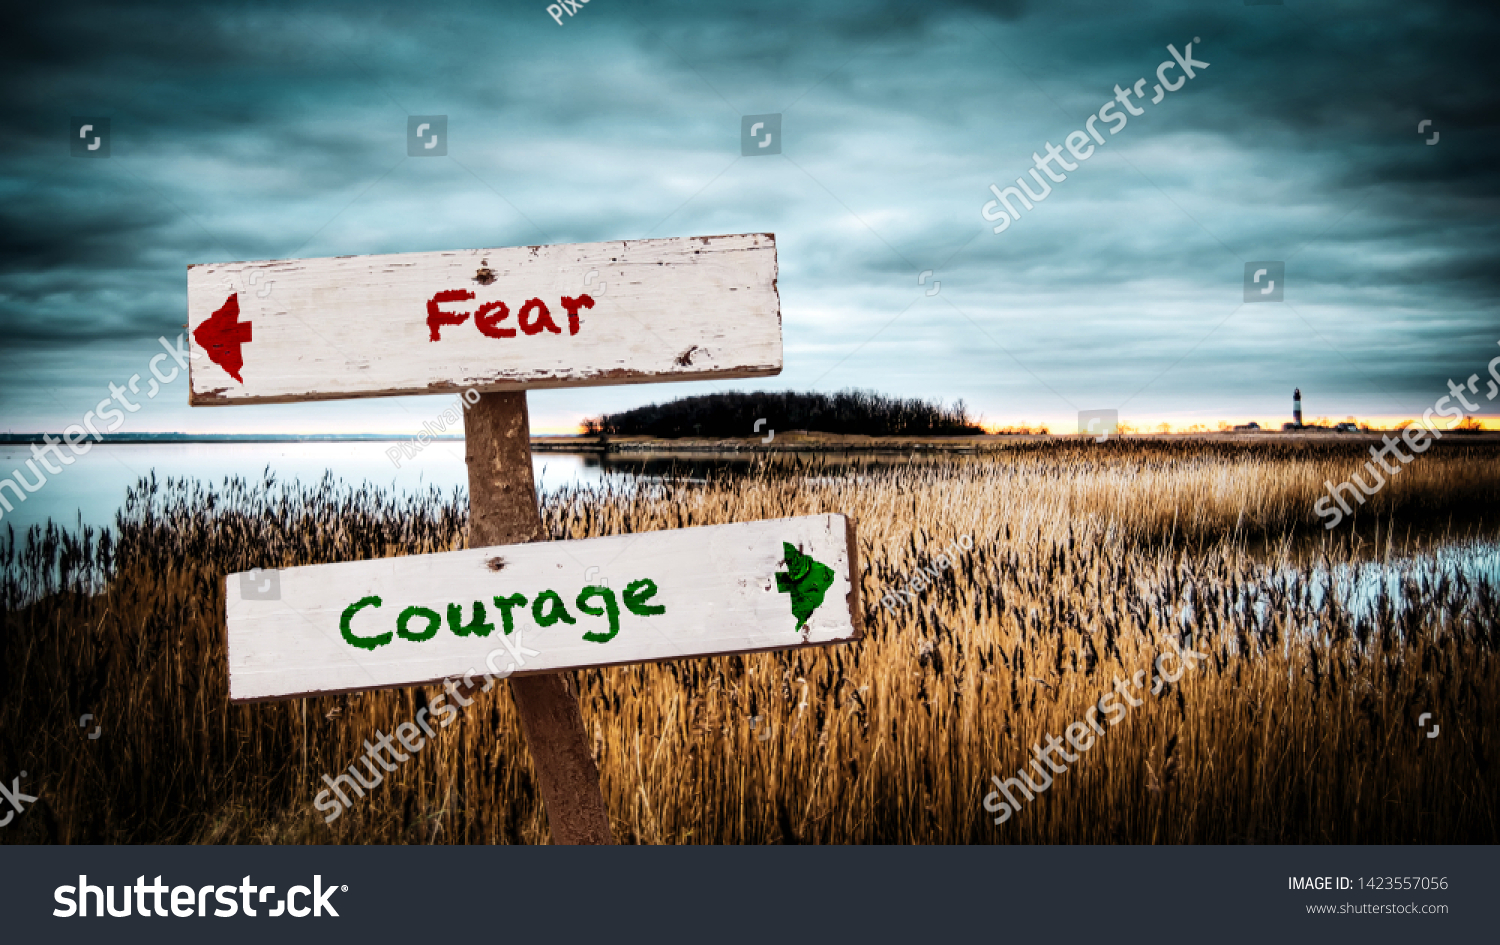 Street Sign the Direction Way to Courage versus Fear #1423557056